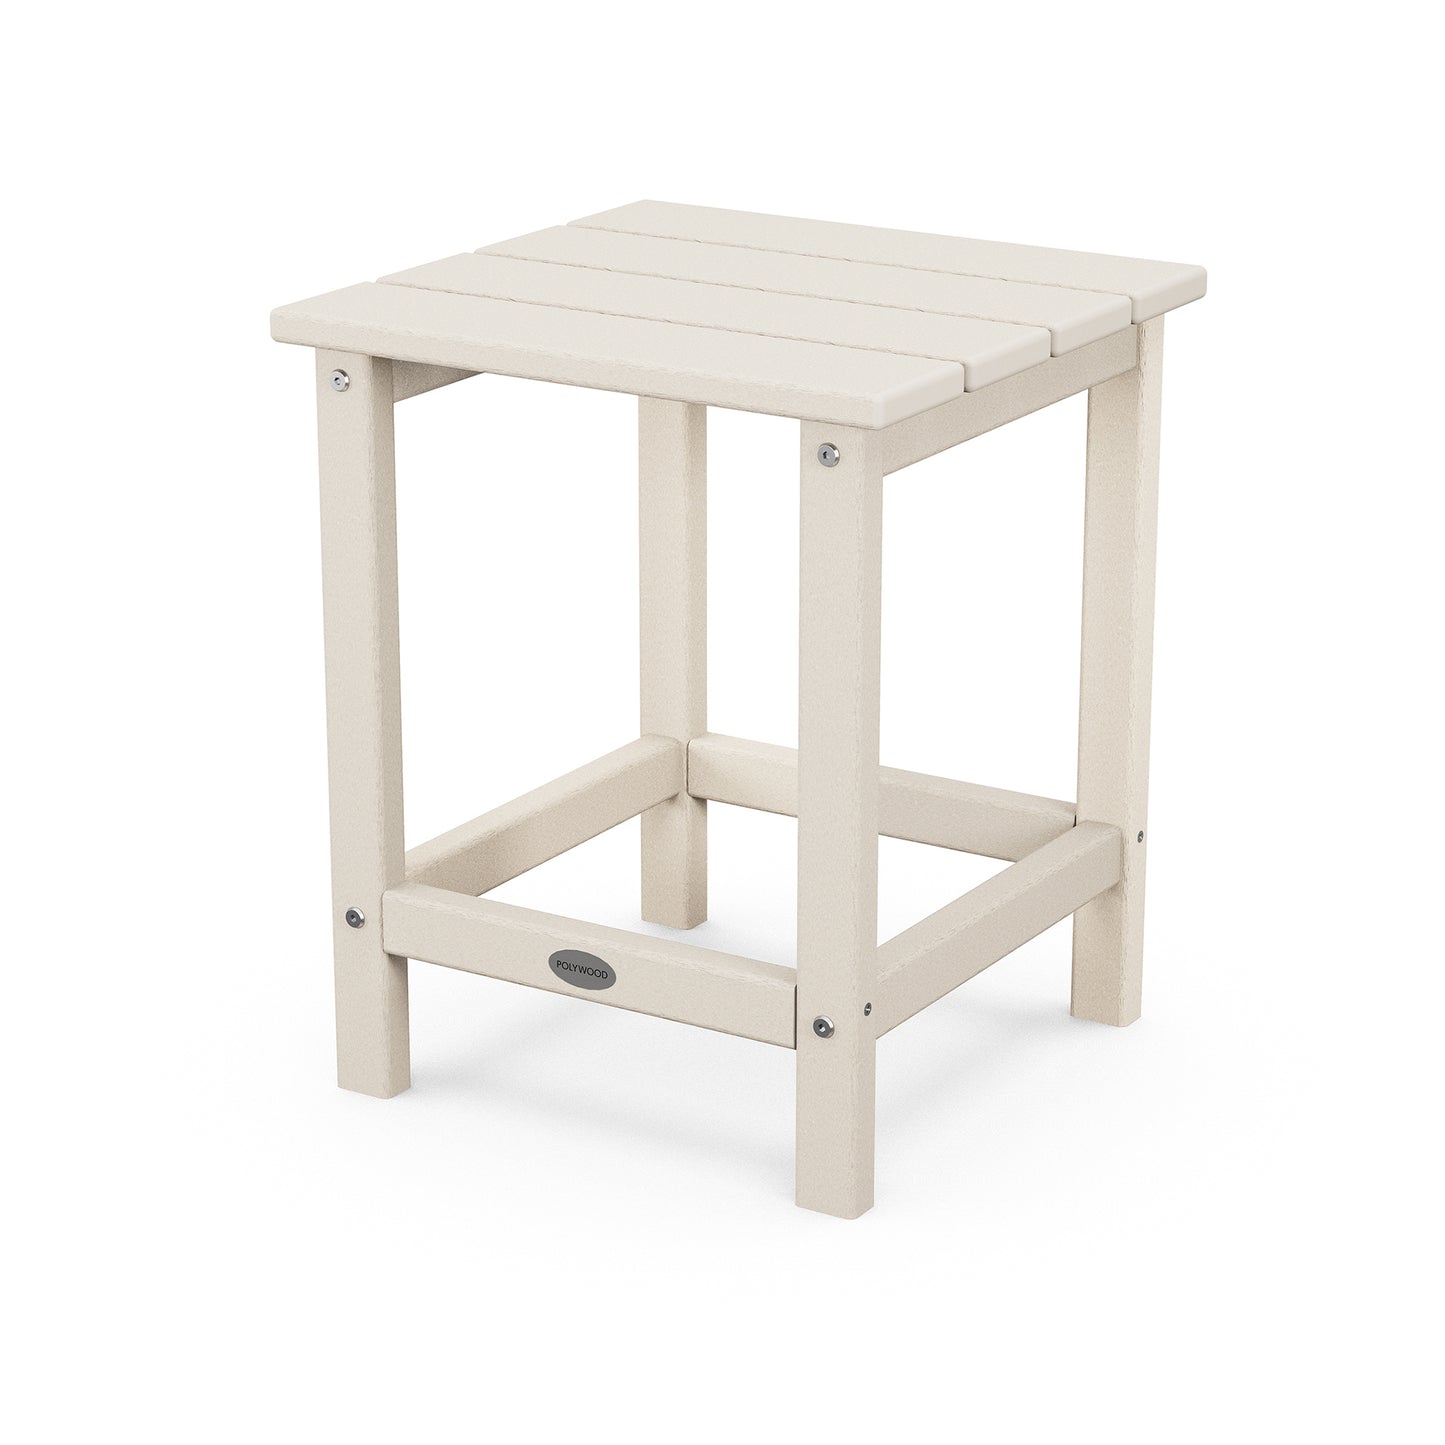 A small, square, beige POLYWOOD Long Island 18" side table with a flat top and a lower shelf, featuring simple, sturdy legs. The table is set against a plain white background.